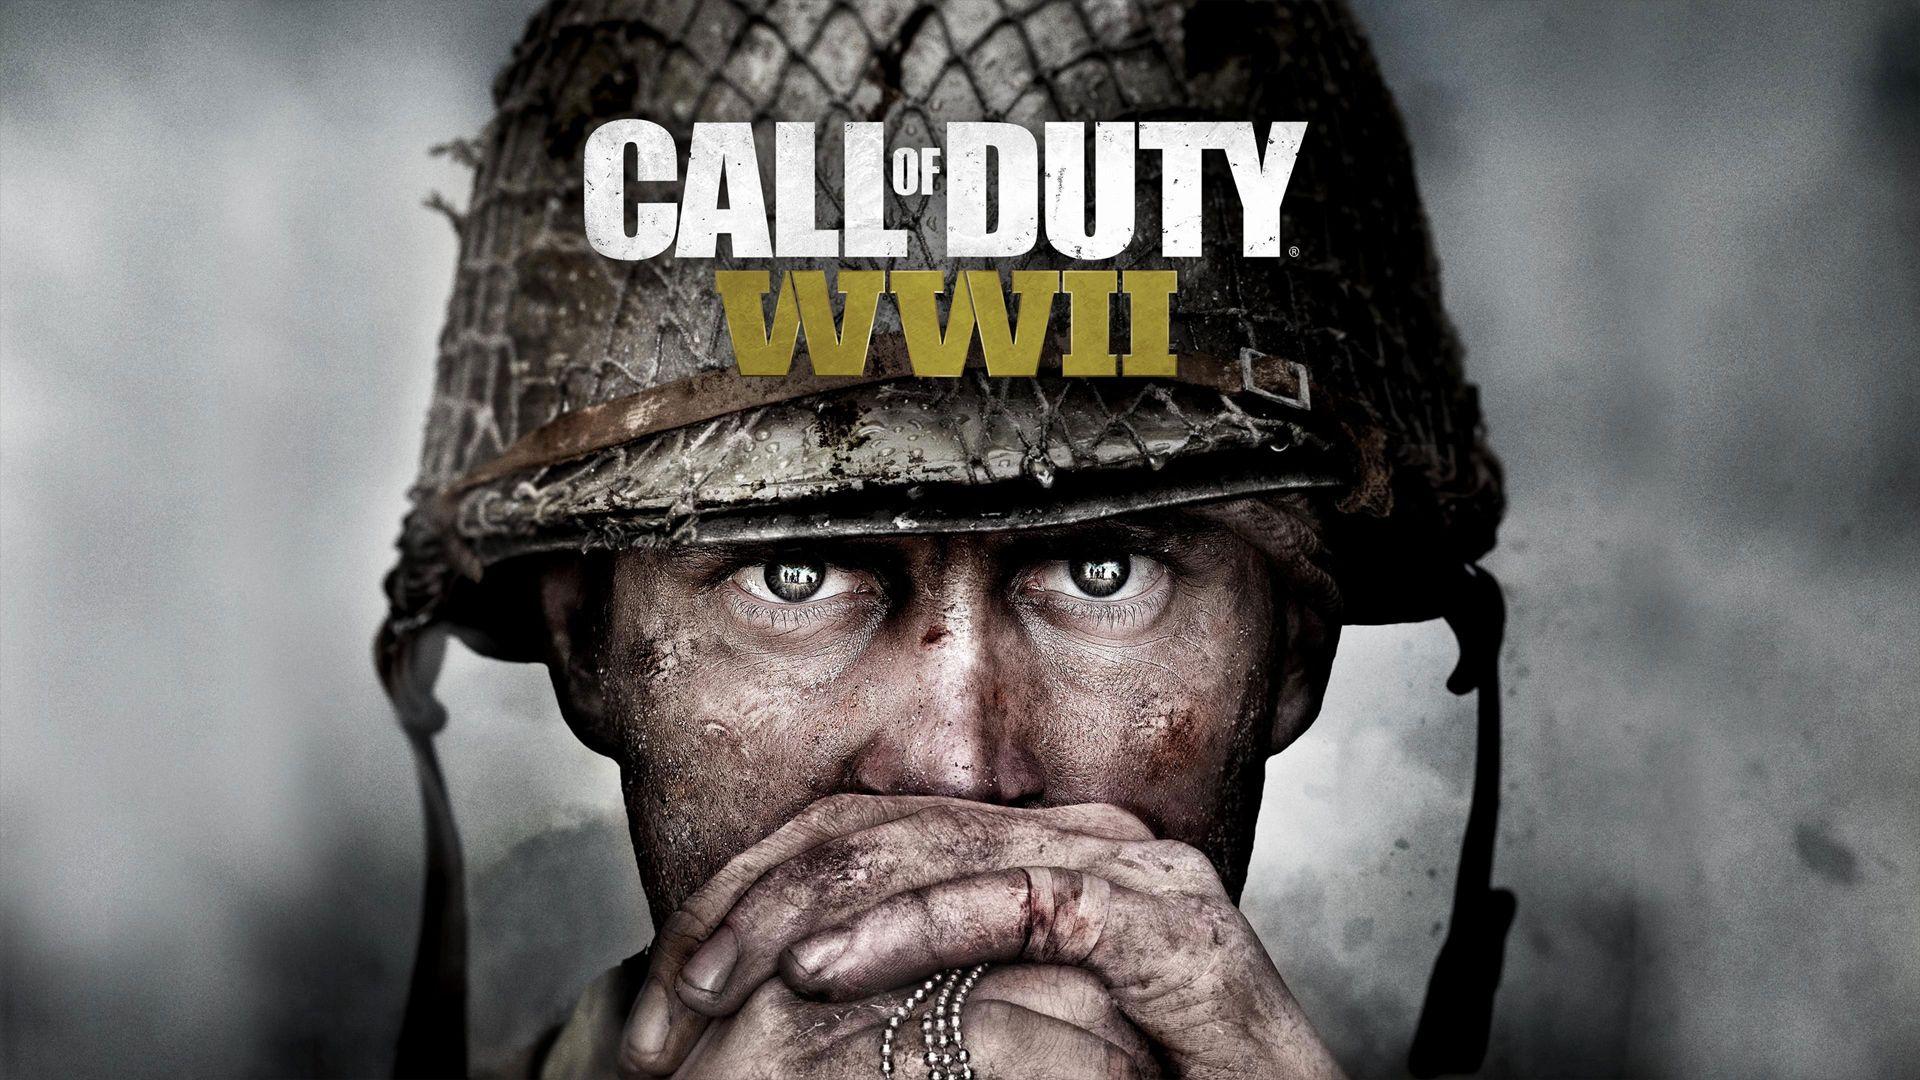 call of duty world war 2 beta two people cant join each other